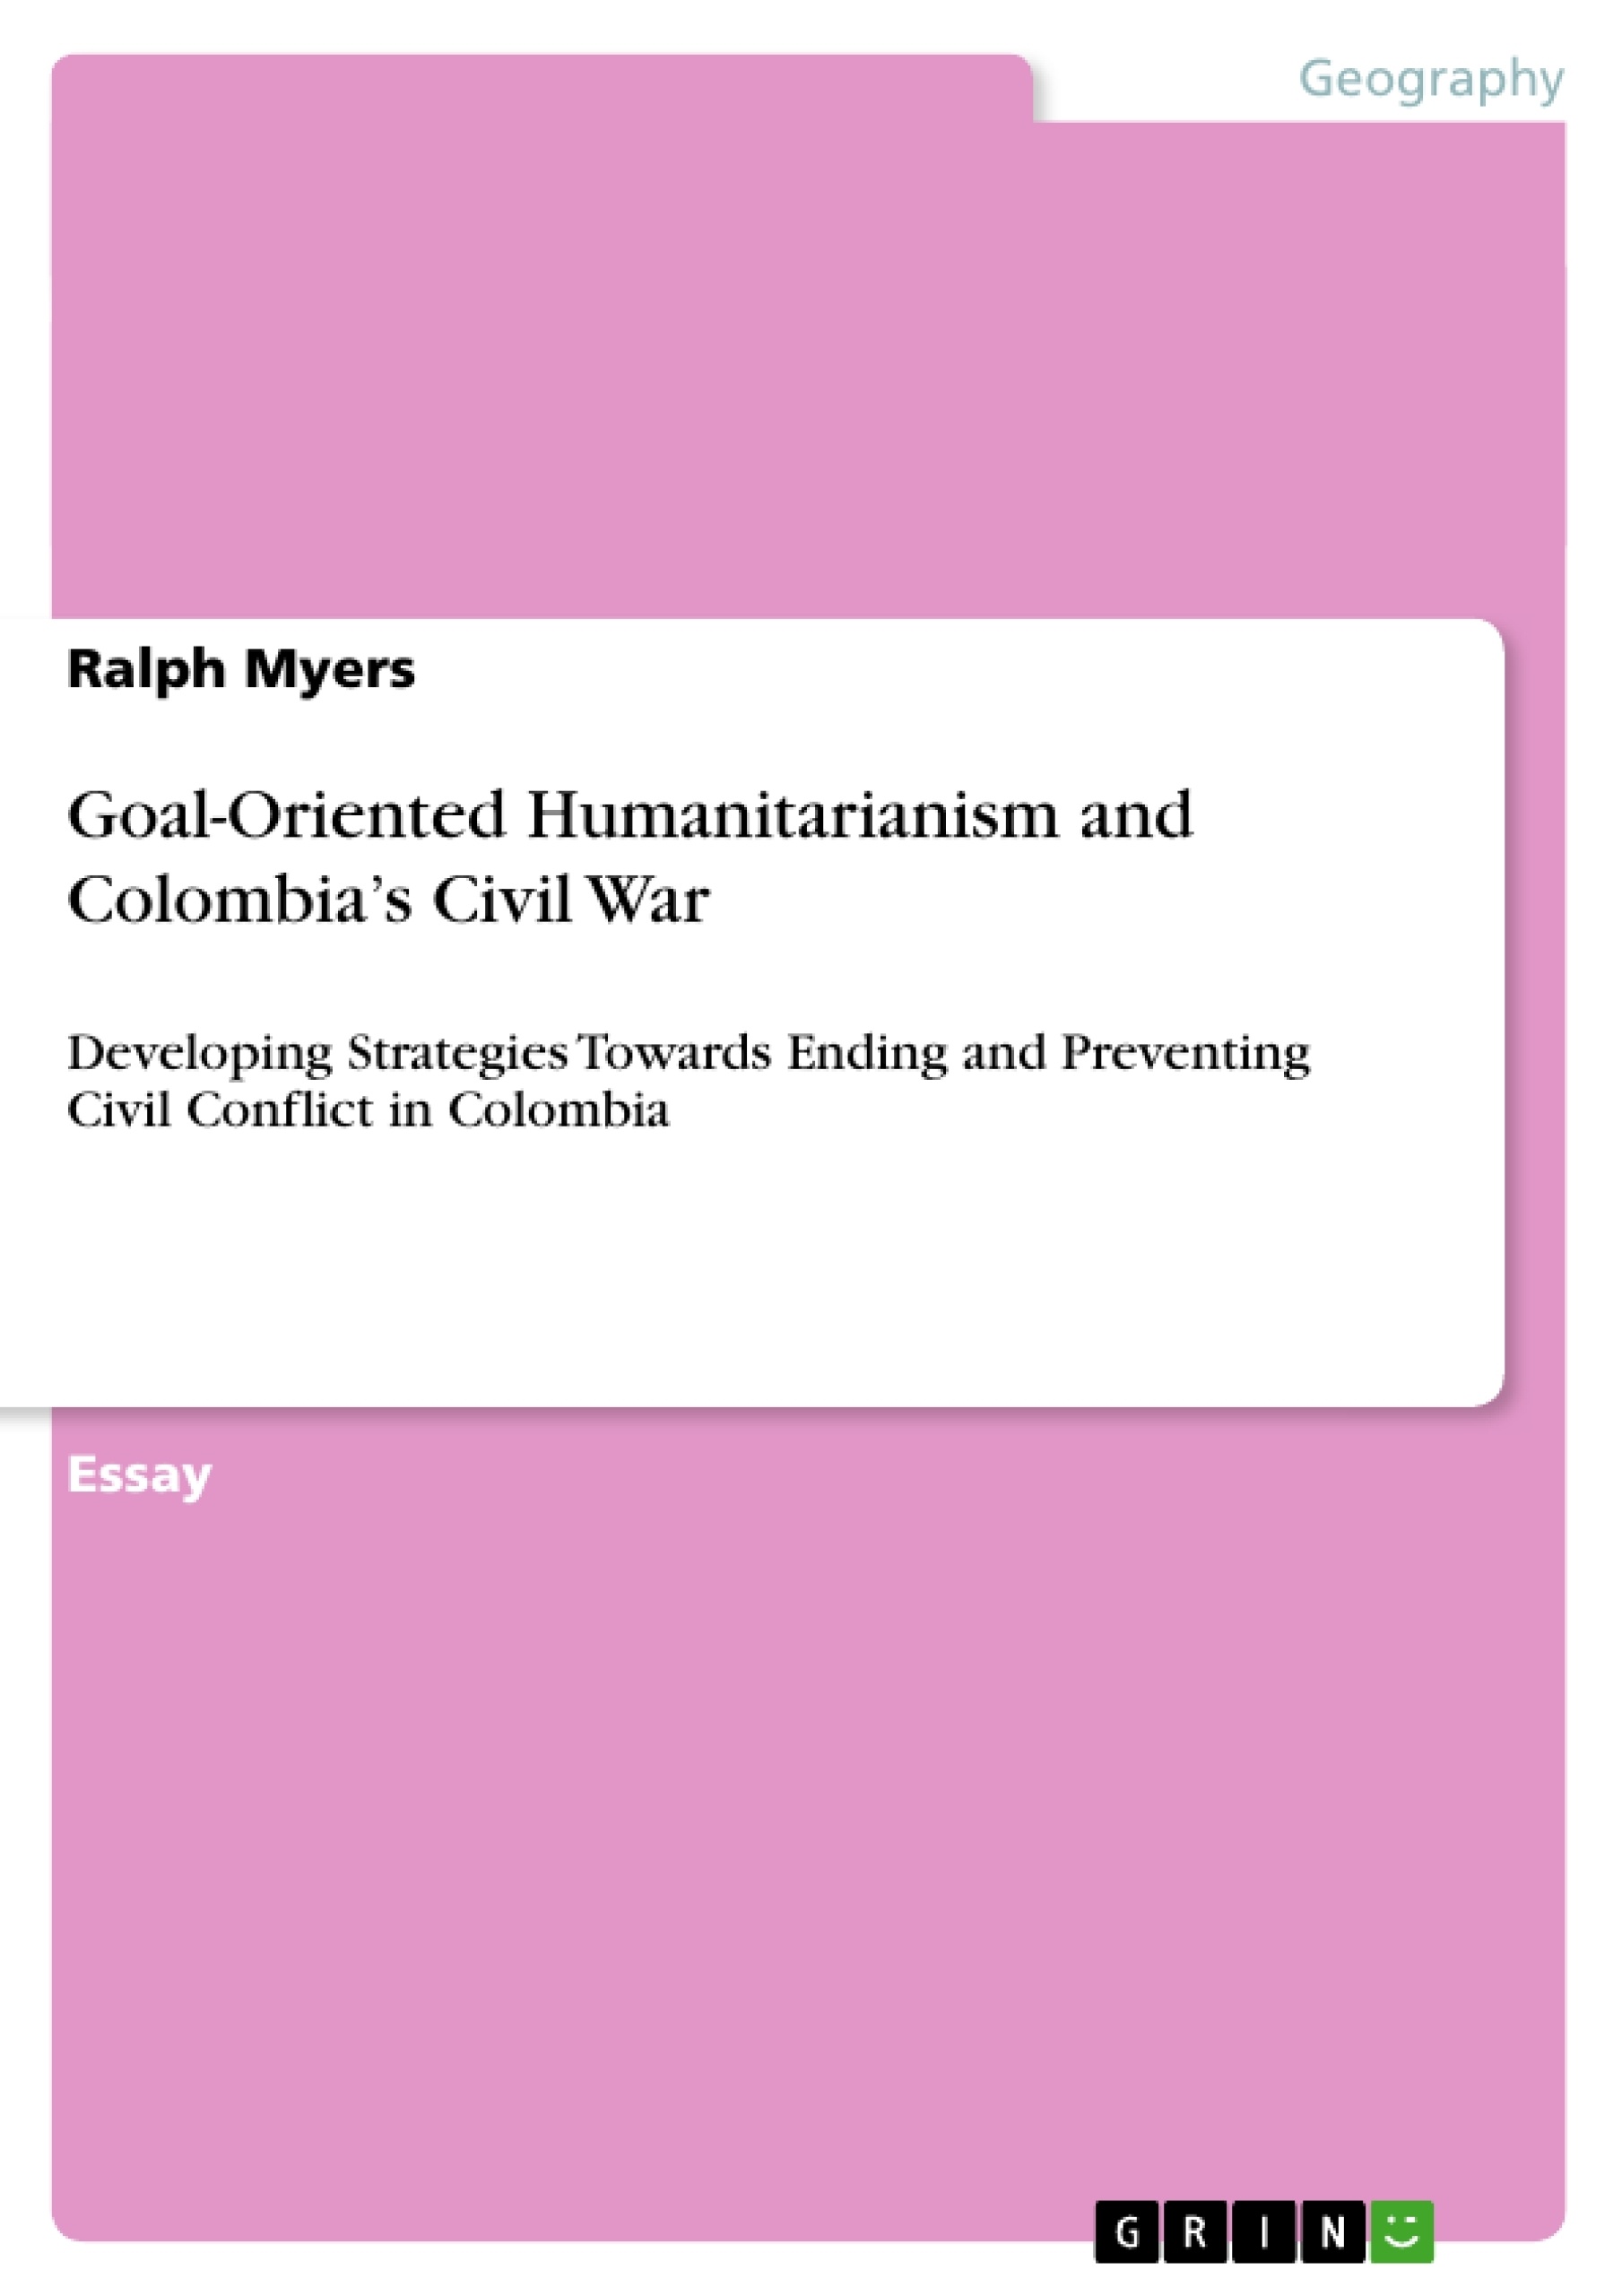 Title: Goal-Oriented Humanitarianism and Colombia’s Civil War